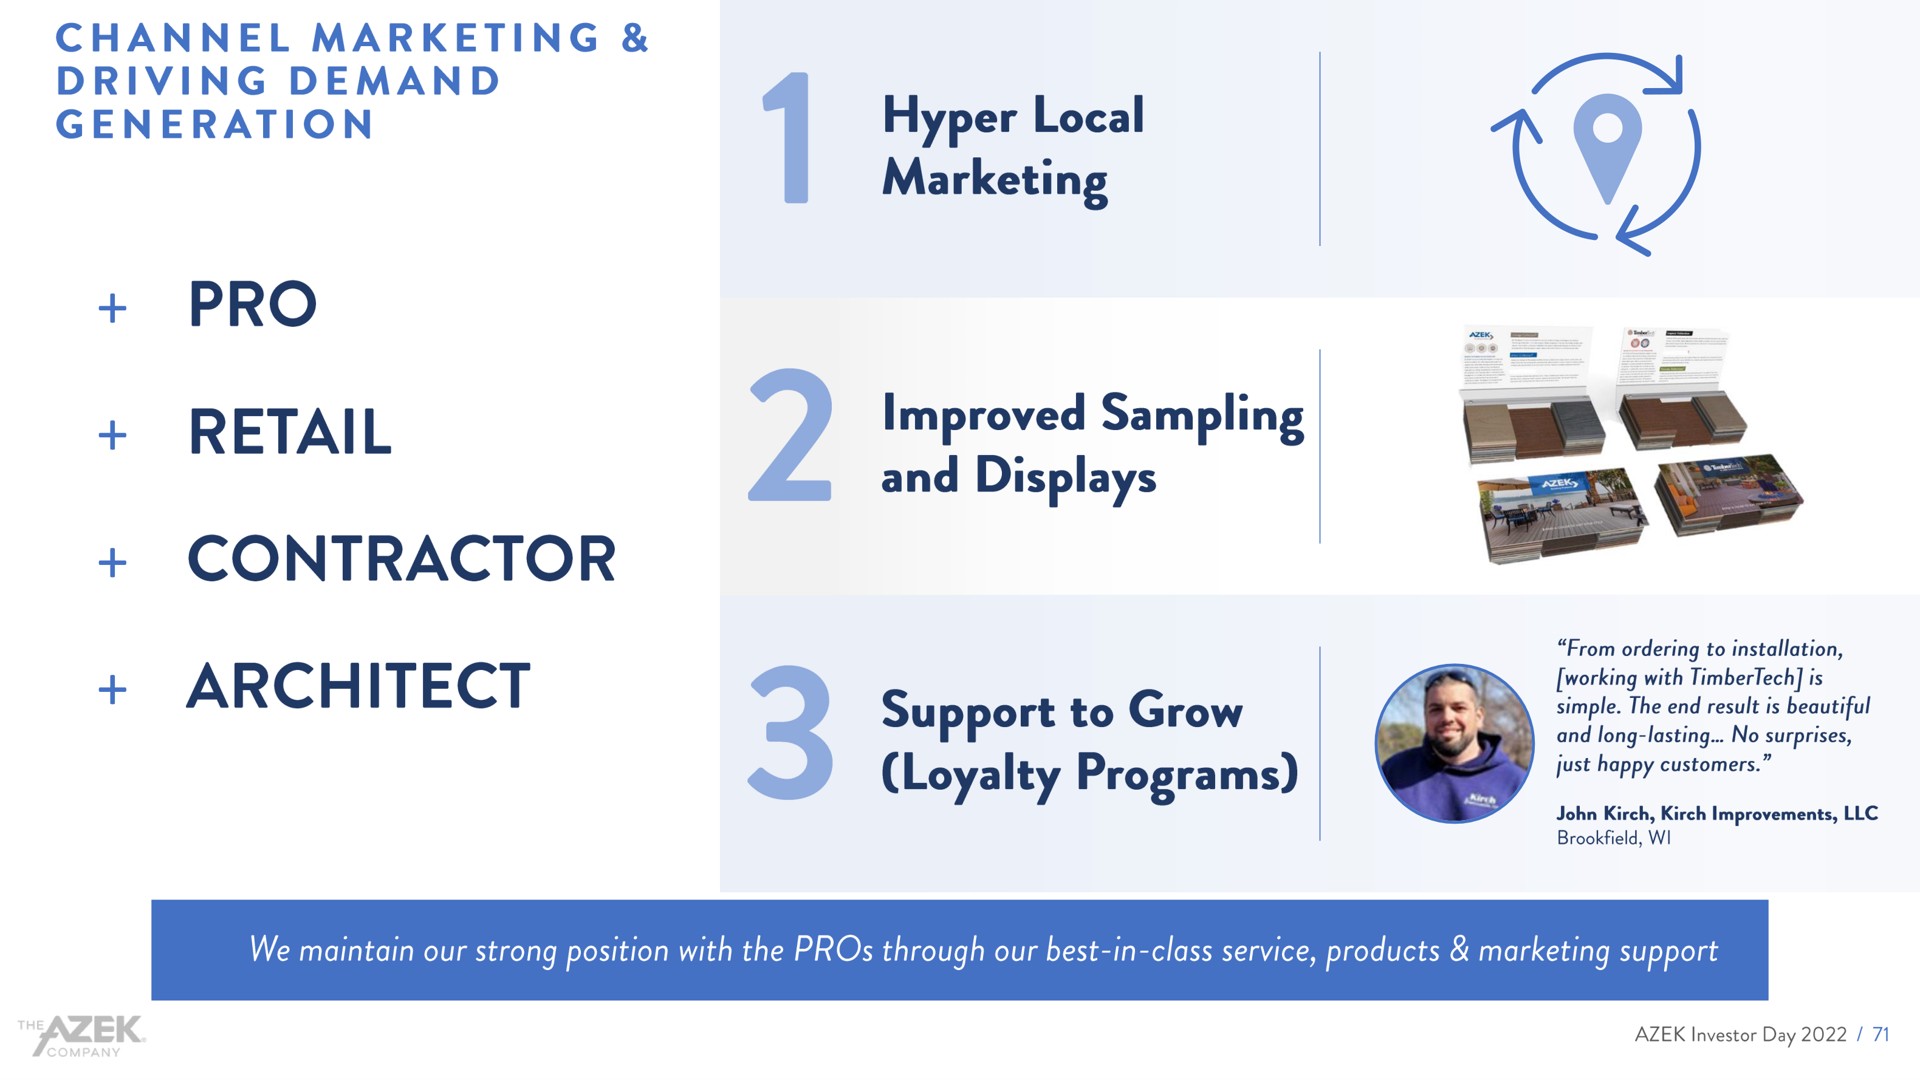 channel marketing driving demand generation pro retail contractor architect hyper local marketing improved sampling and displays support to grow loyalty programs | Azek